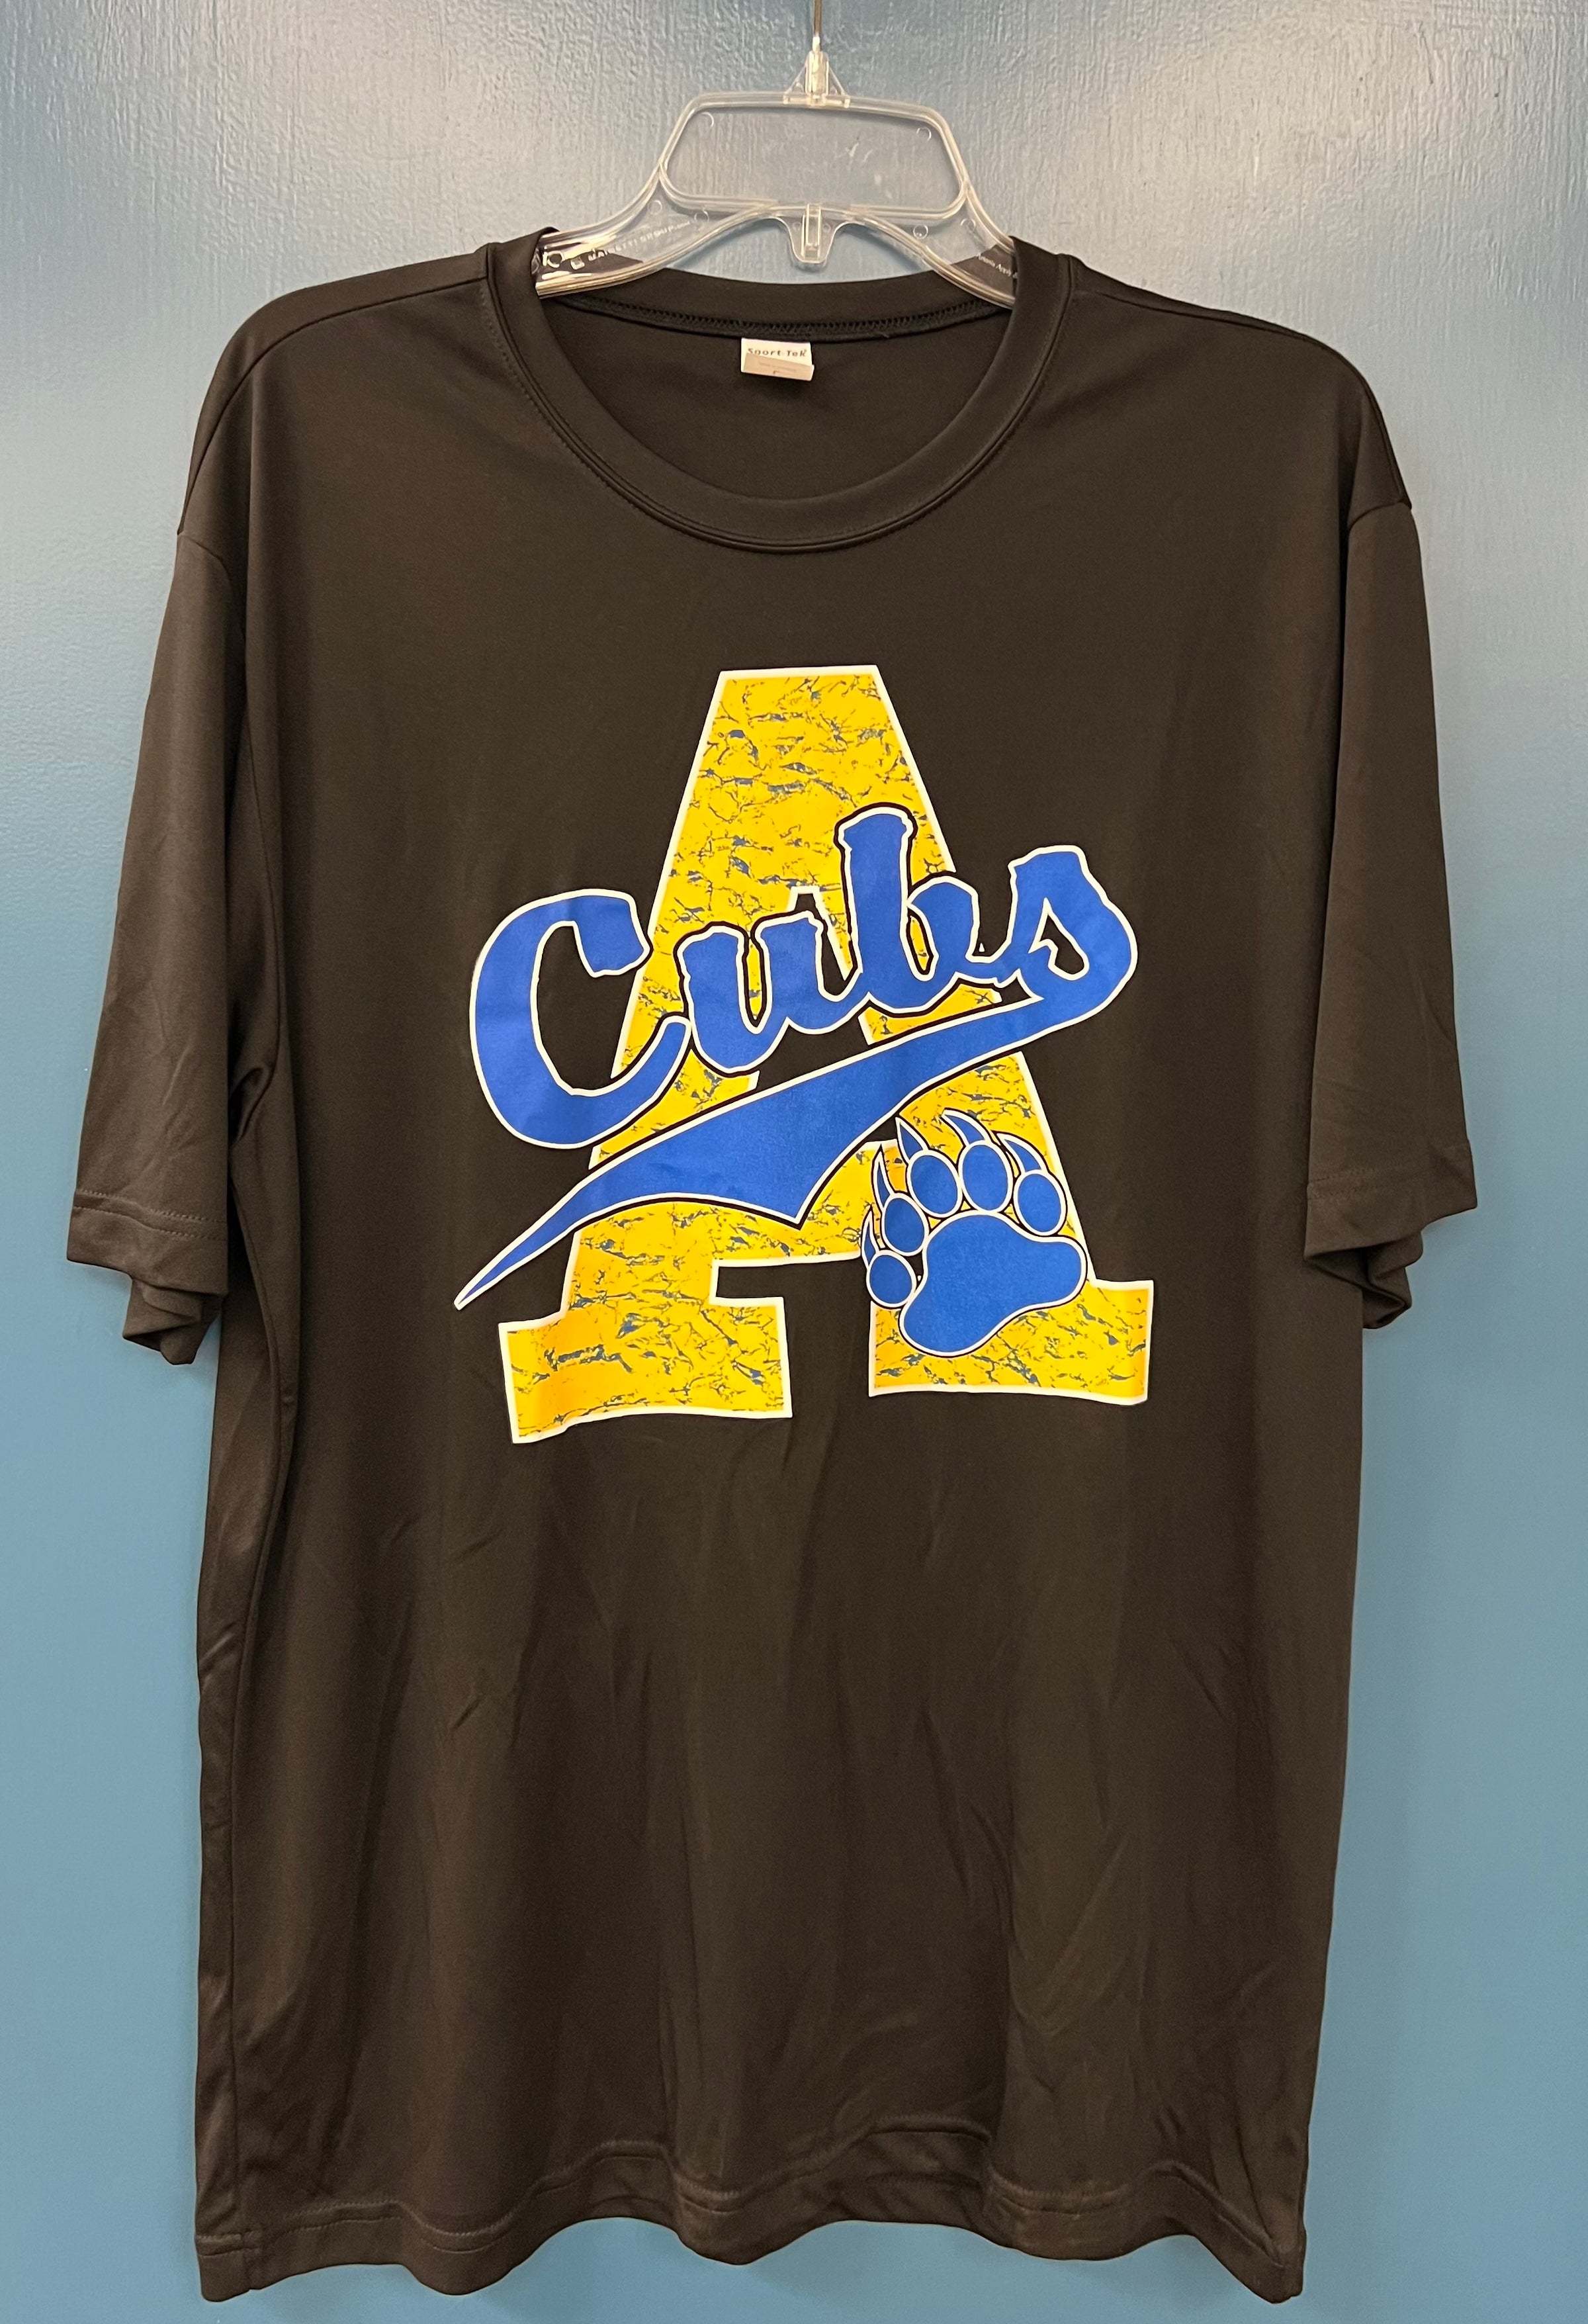 Anderson Union High School Cubs Apparel Store